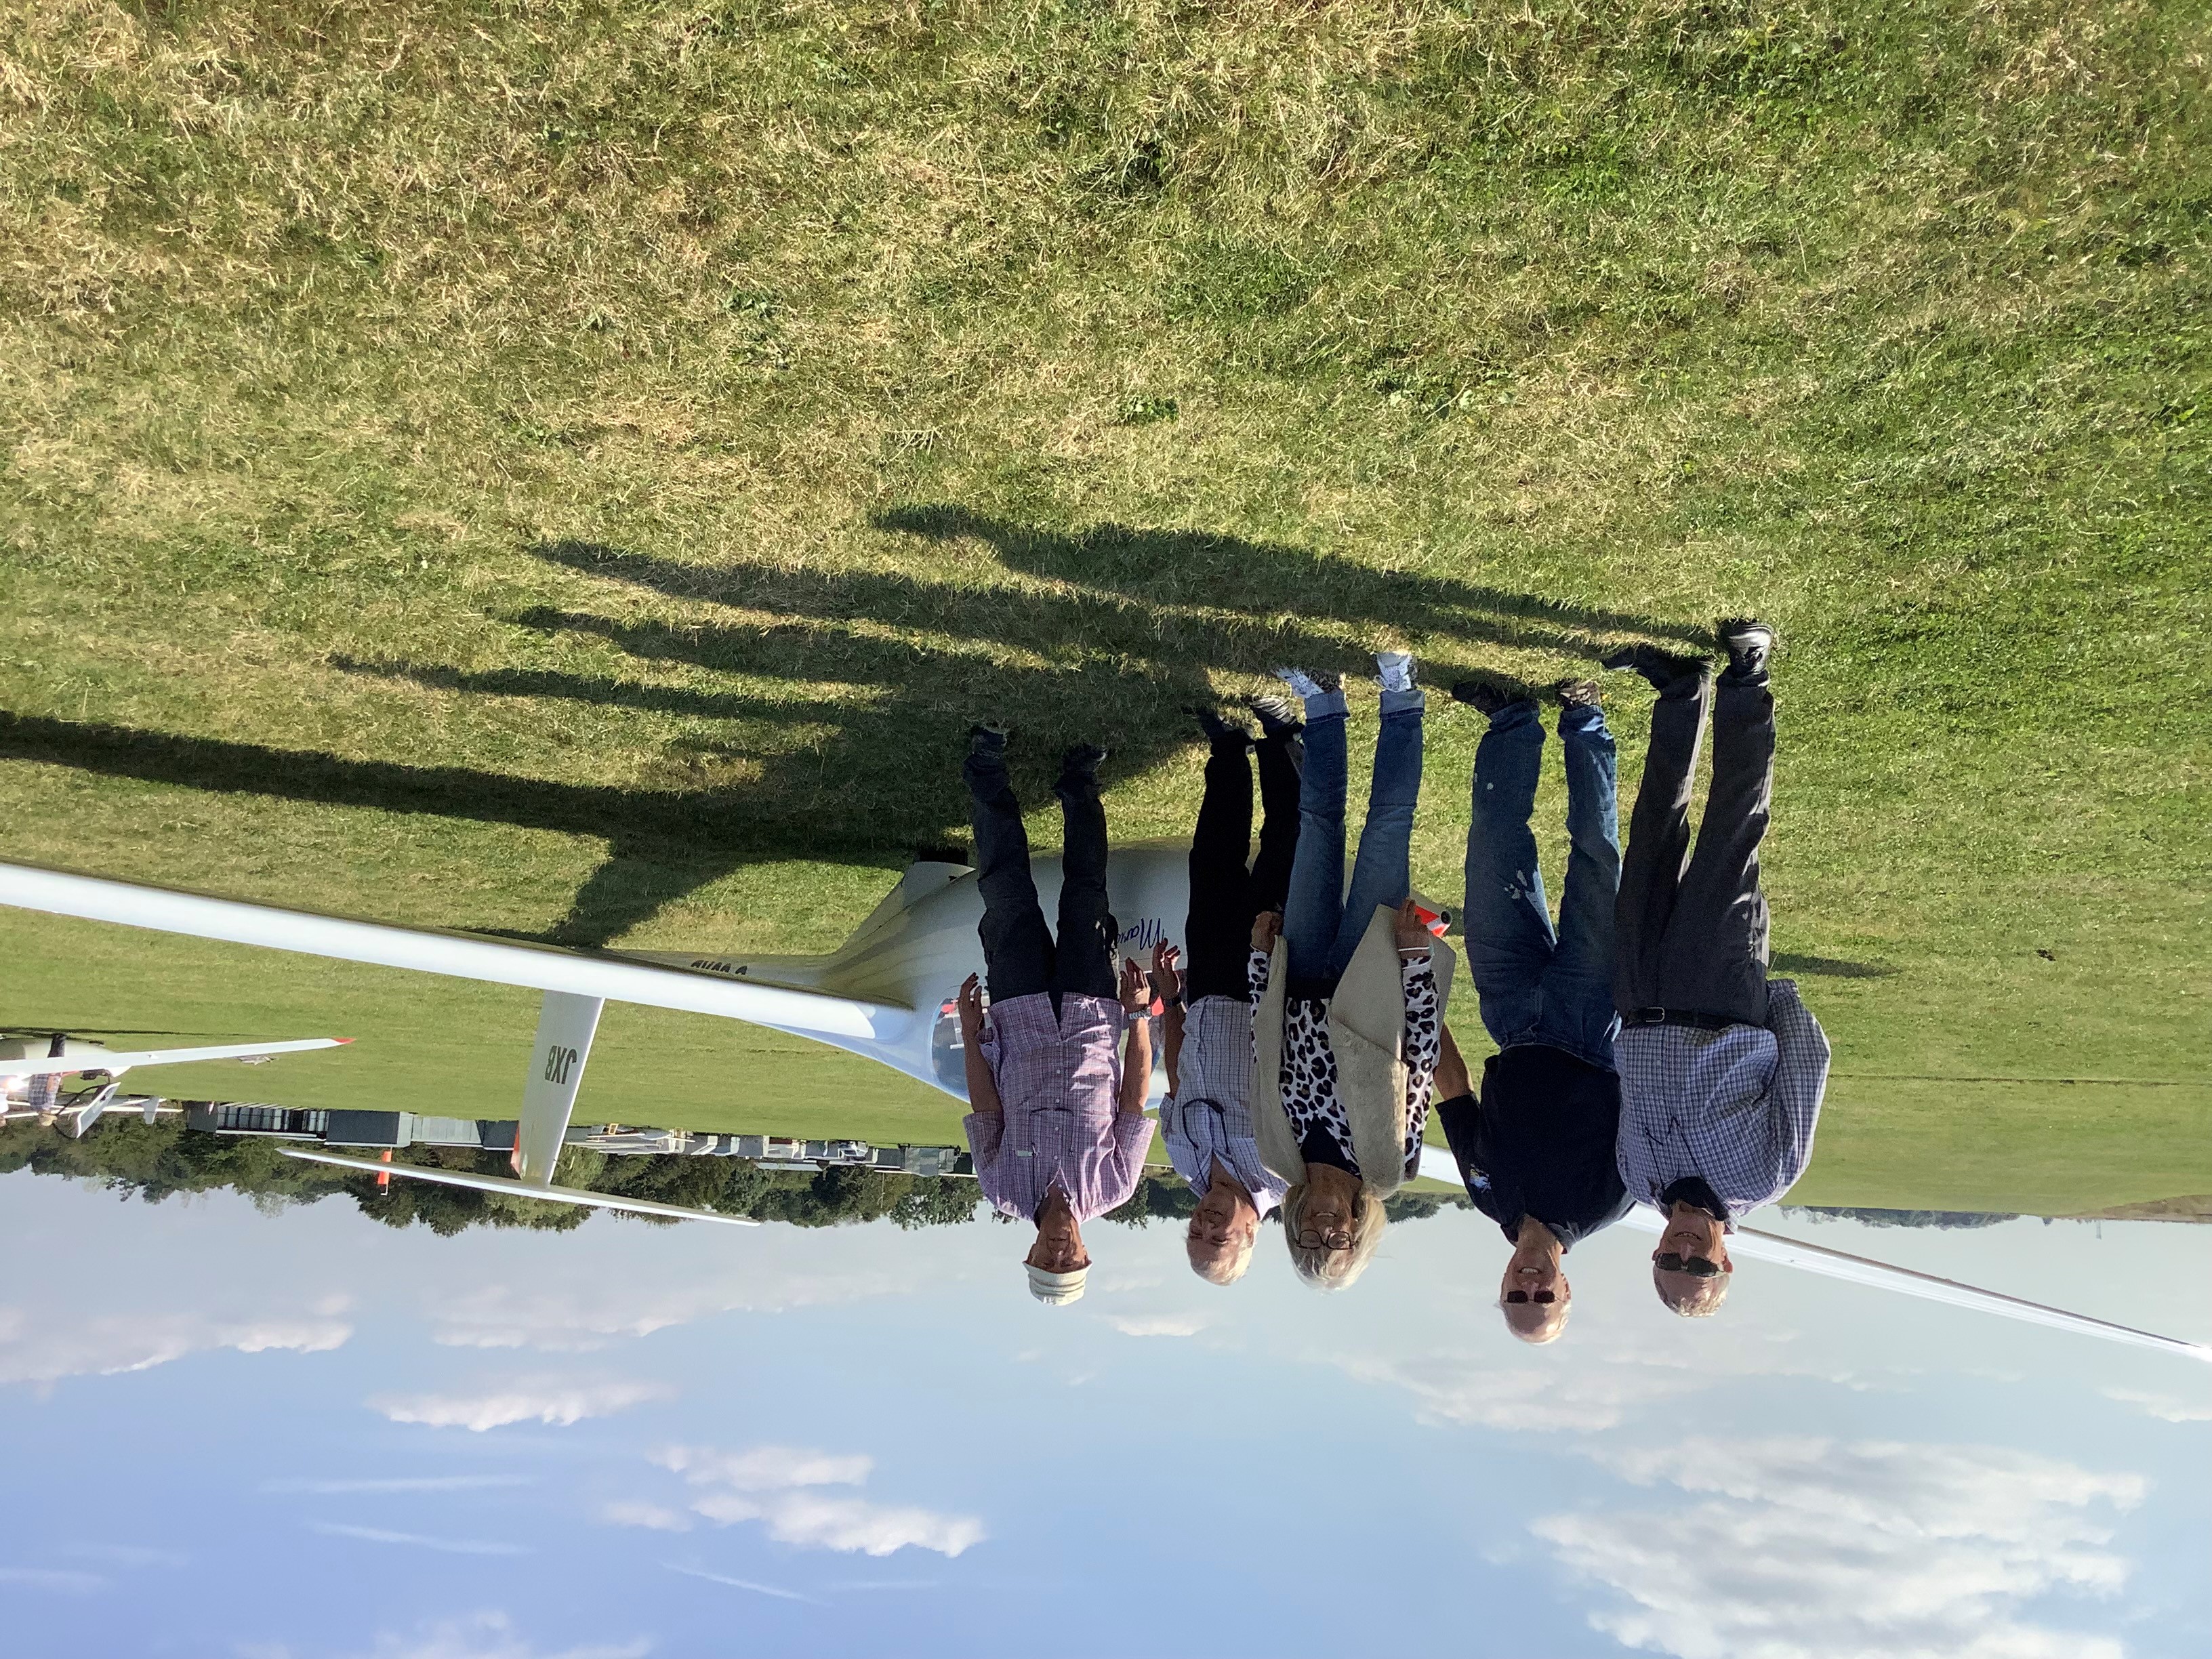 An image of people standing by a glider